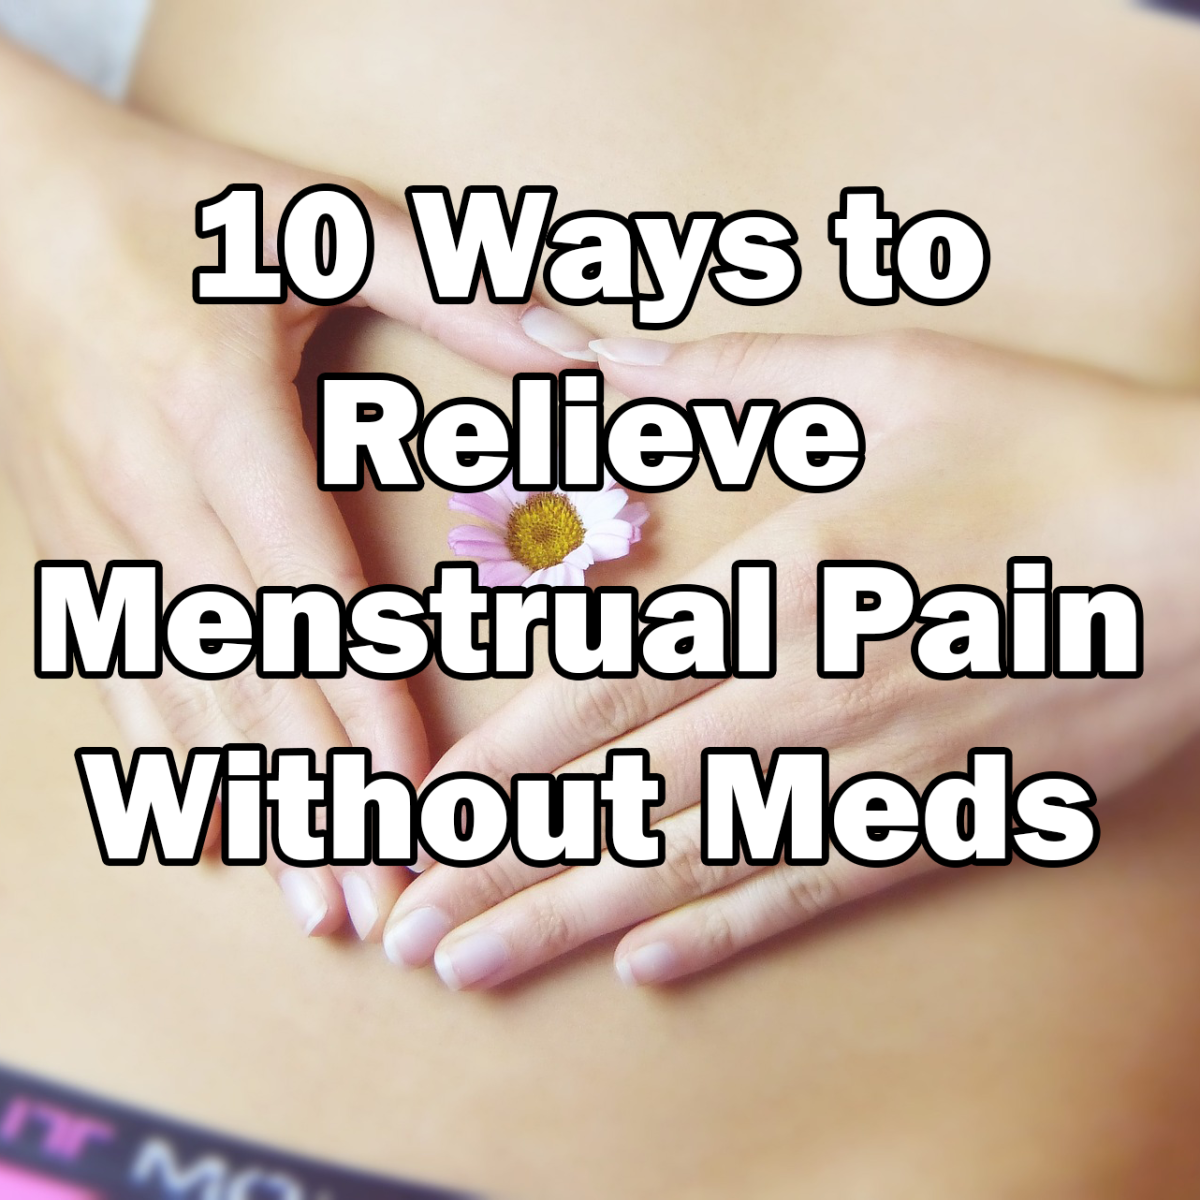 How to Relieve Menstrual Pain Without Medication: 10 Alternatives to Drugs